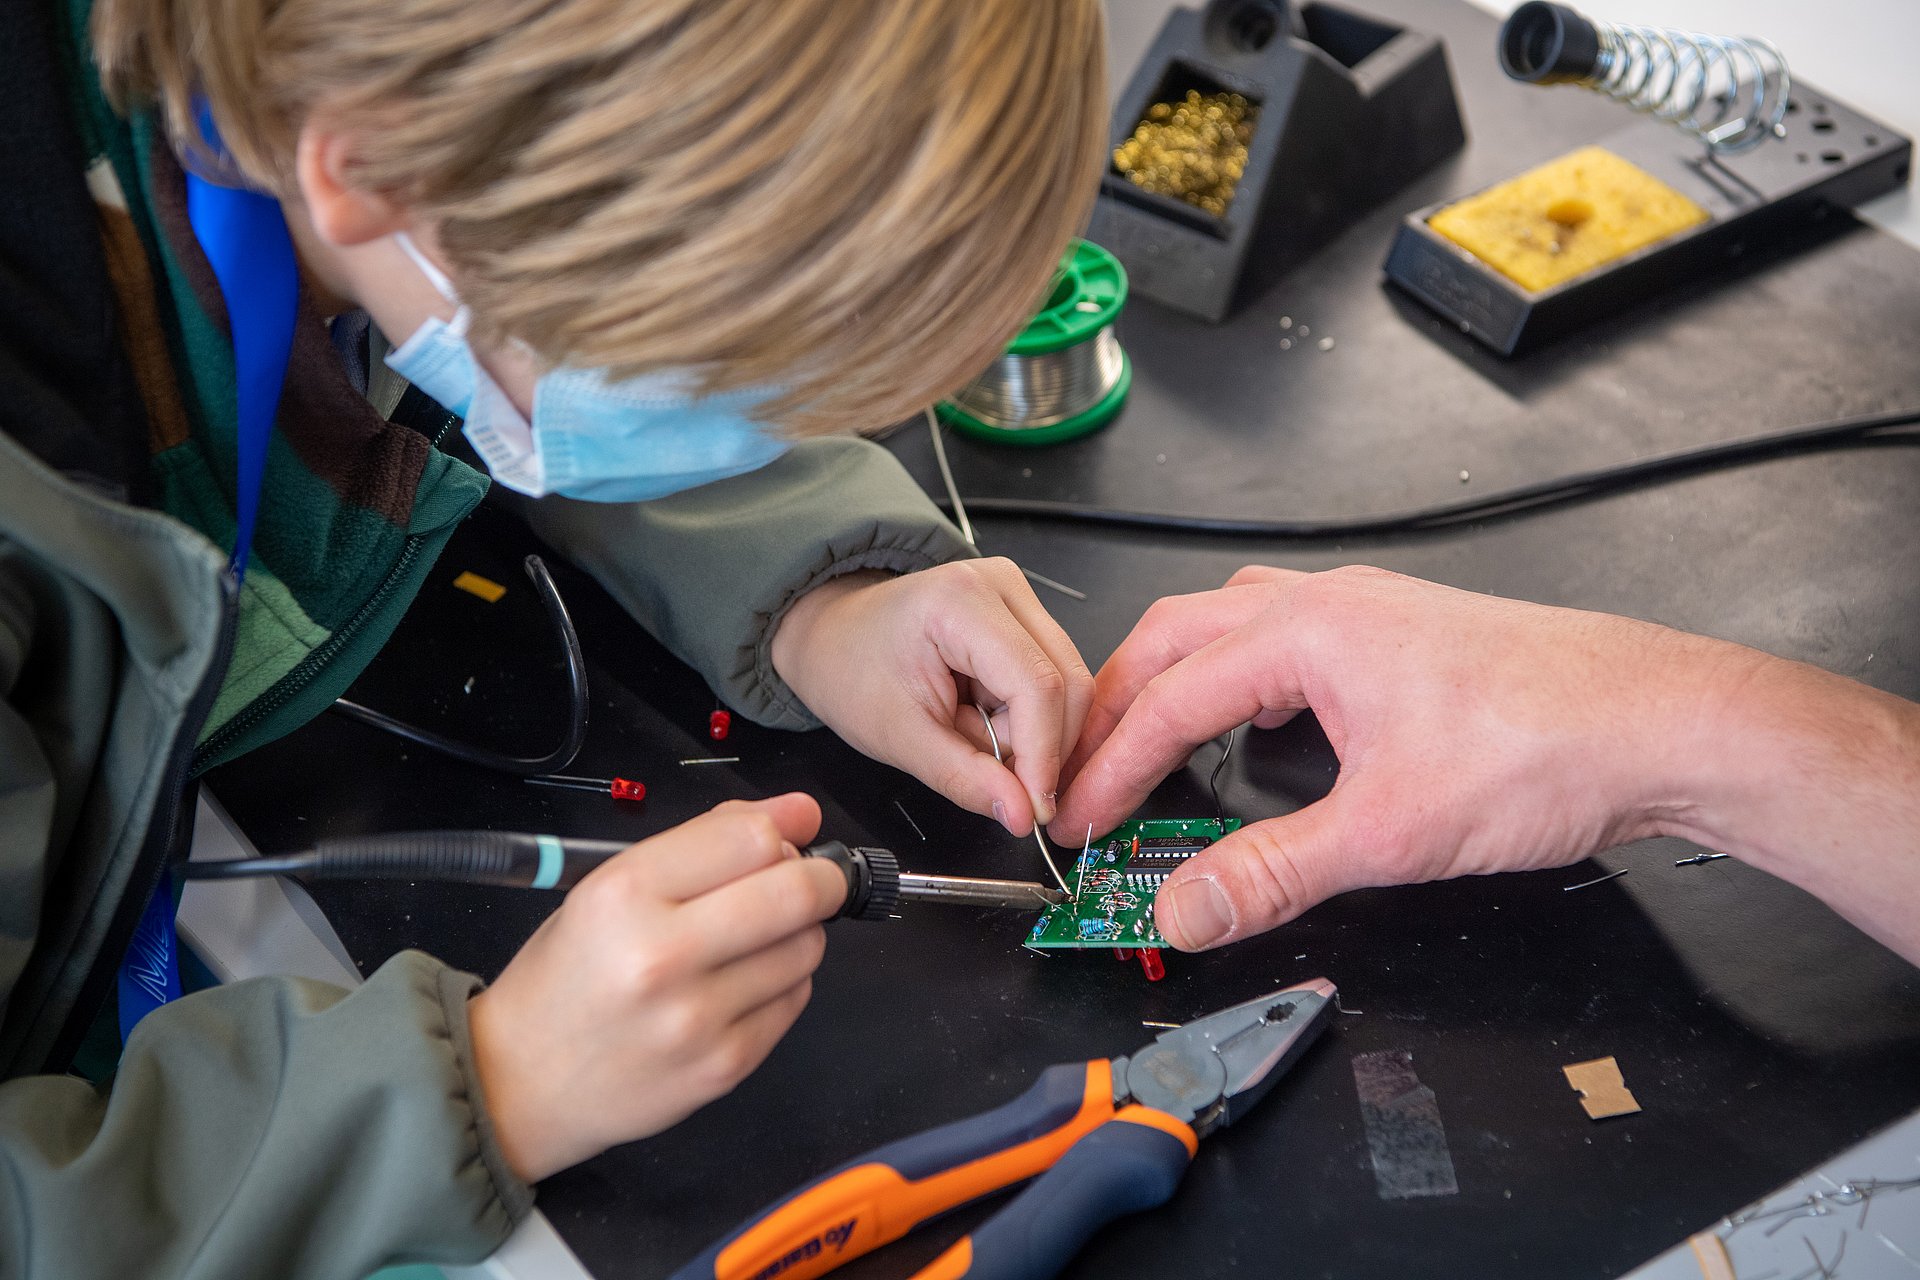 A child wearing a mask and an anorak soldering on a component held by another person.